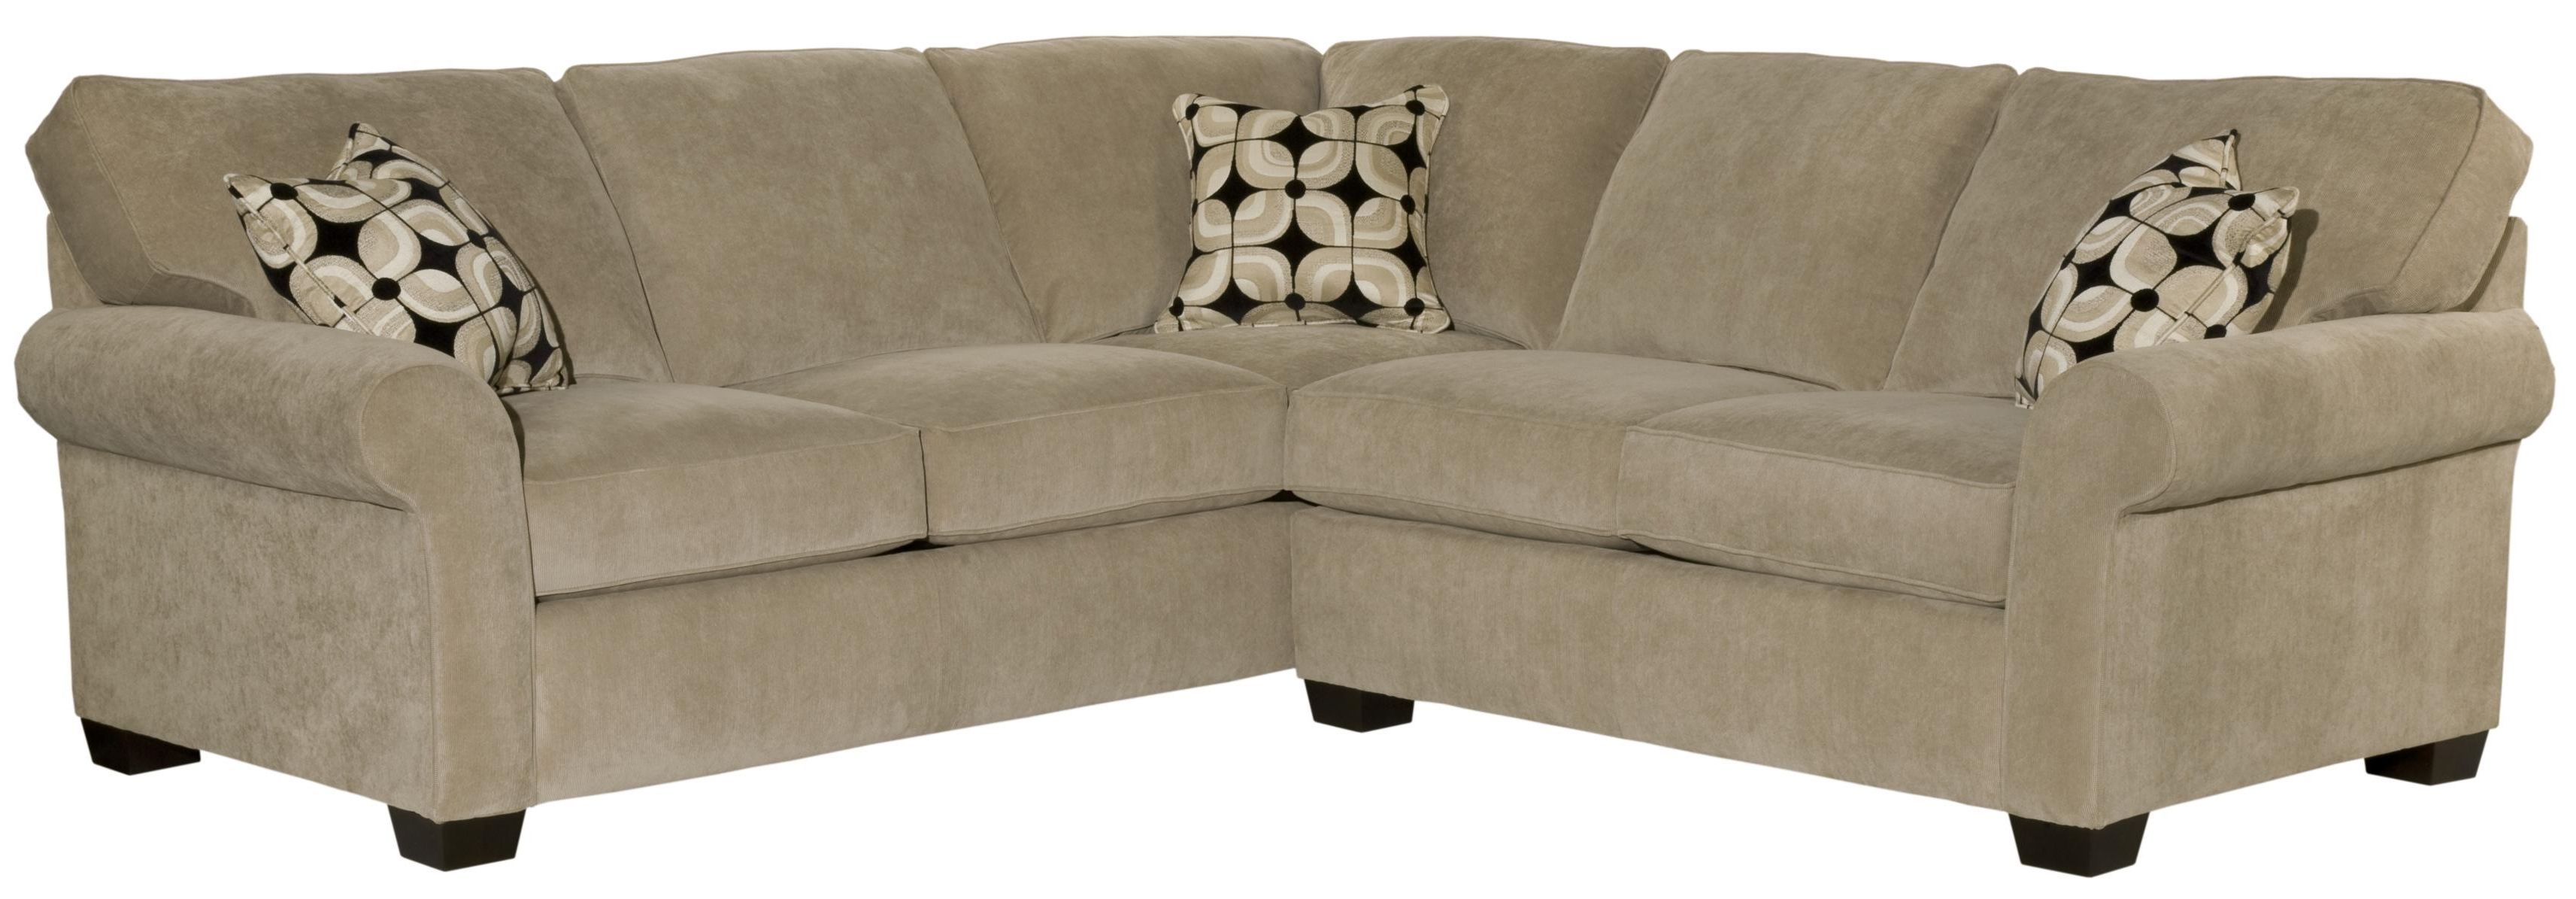 Sectional Sofas At Broyhill Regarding Favorite Broyhill Furniture Ethan Two Piece Sectional With Corner Sofa (View 4 of 20)